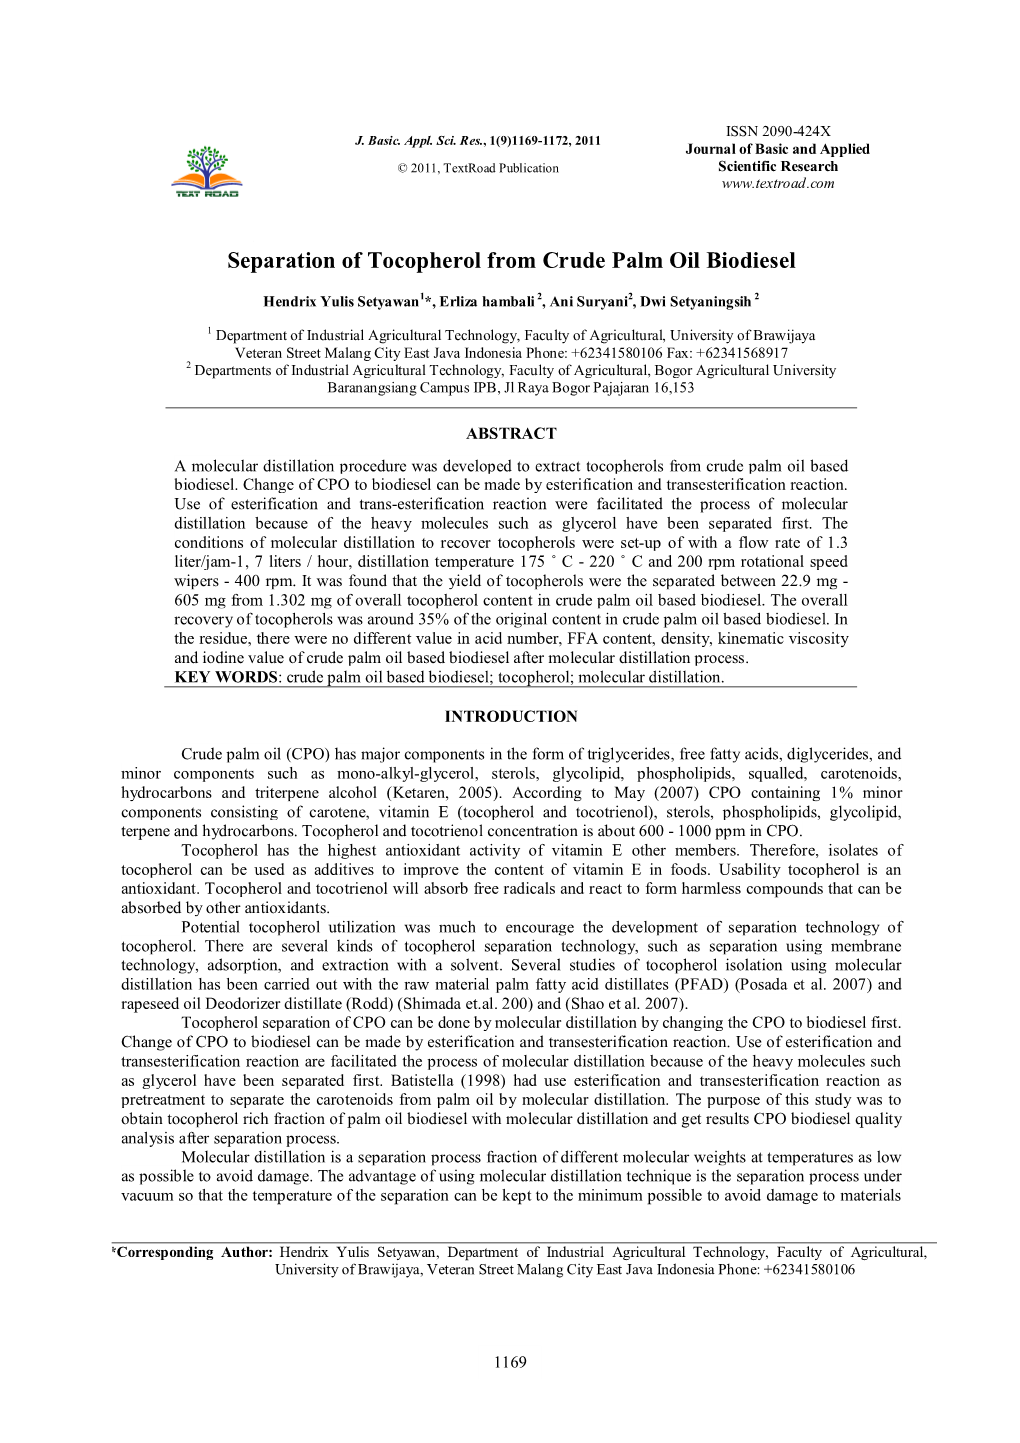 Separation of Tocopherol from Crude Palm Oil Biodiesel